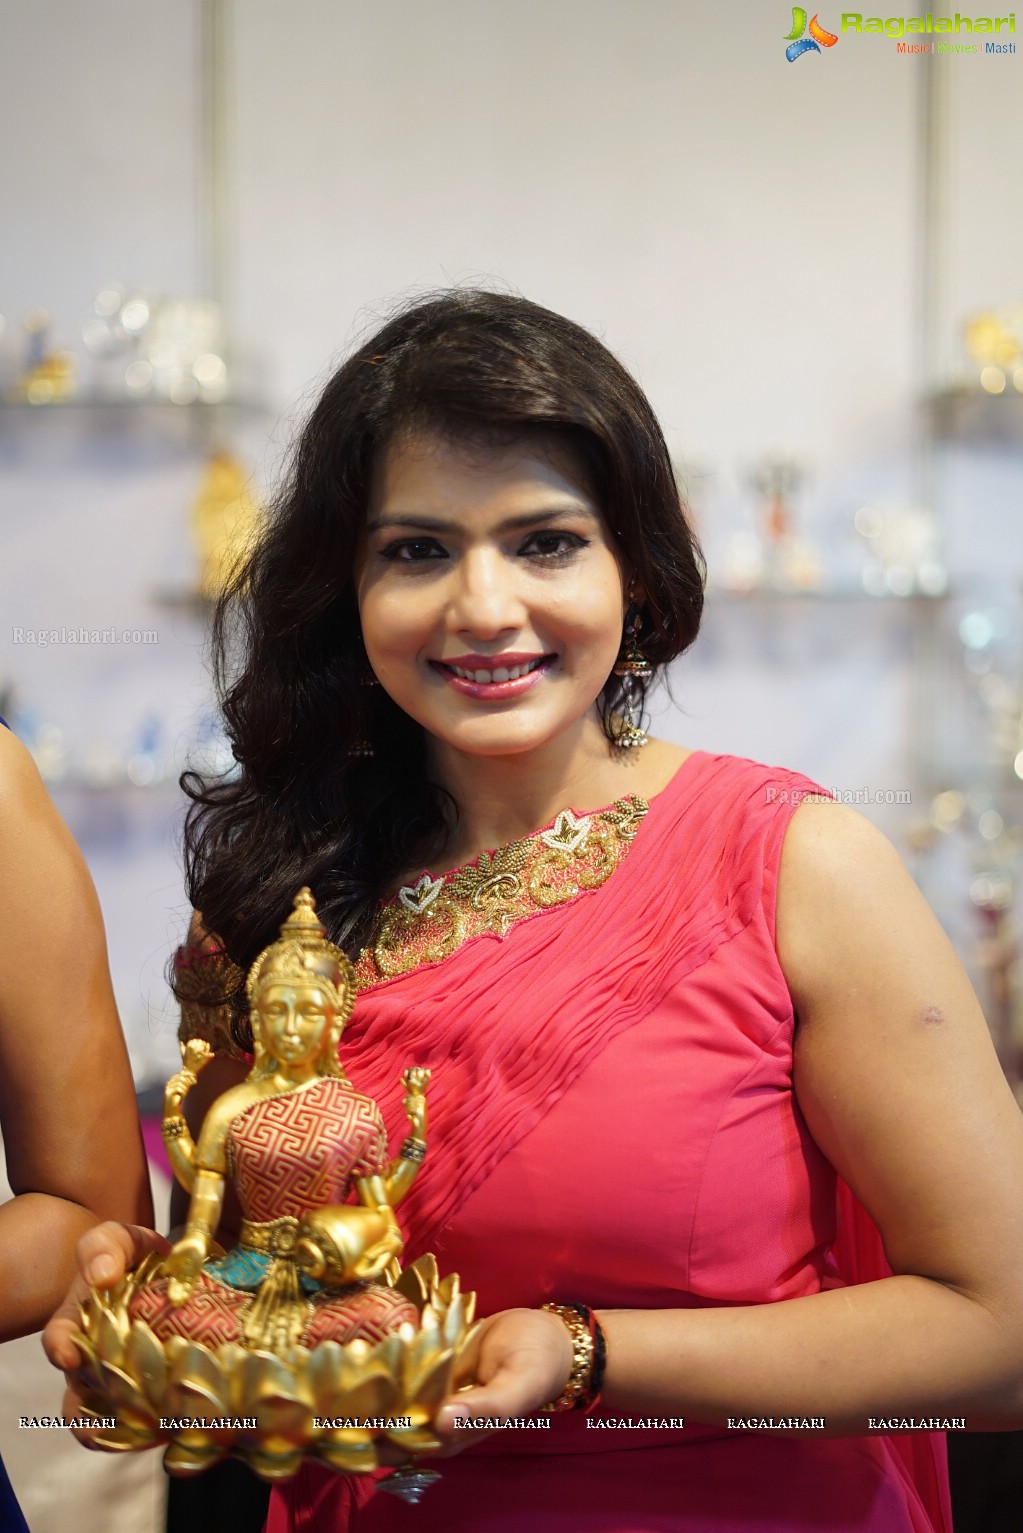 Divya Nandini launches Trendz Life Style Expo at N Convention